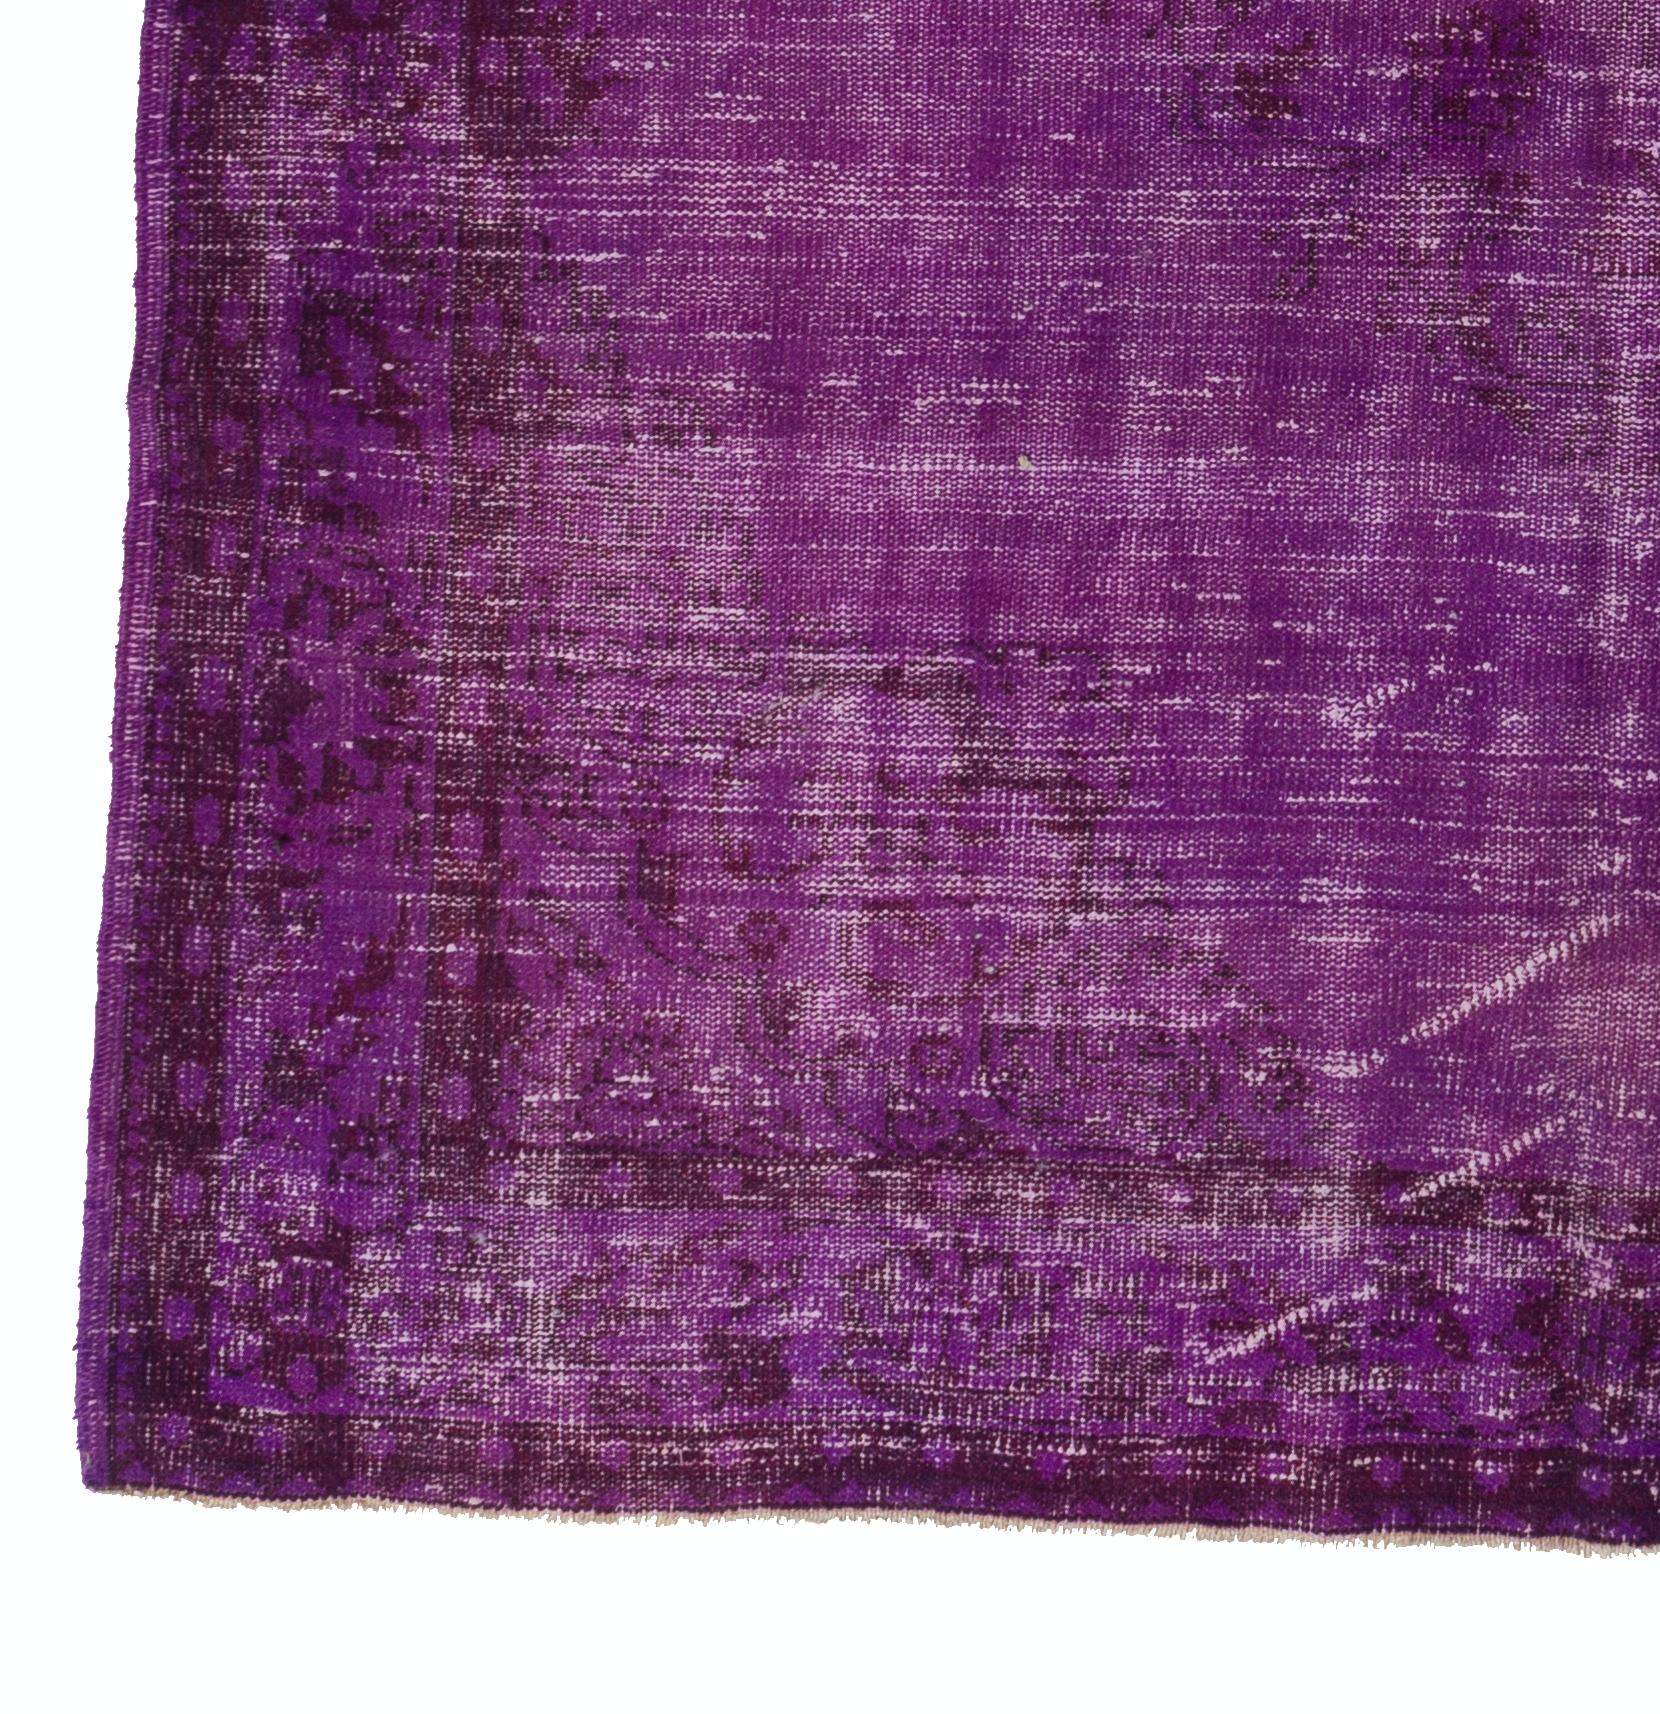 Mid-20th Century 6.5x10 Ft Vintage Turkish Area Rug Over-Dyed in Purple for Modern Interiors For Sale